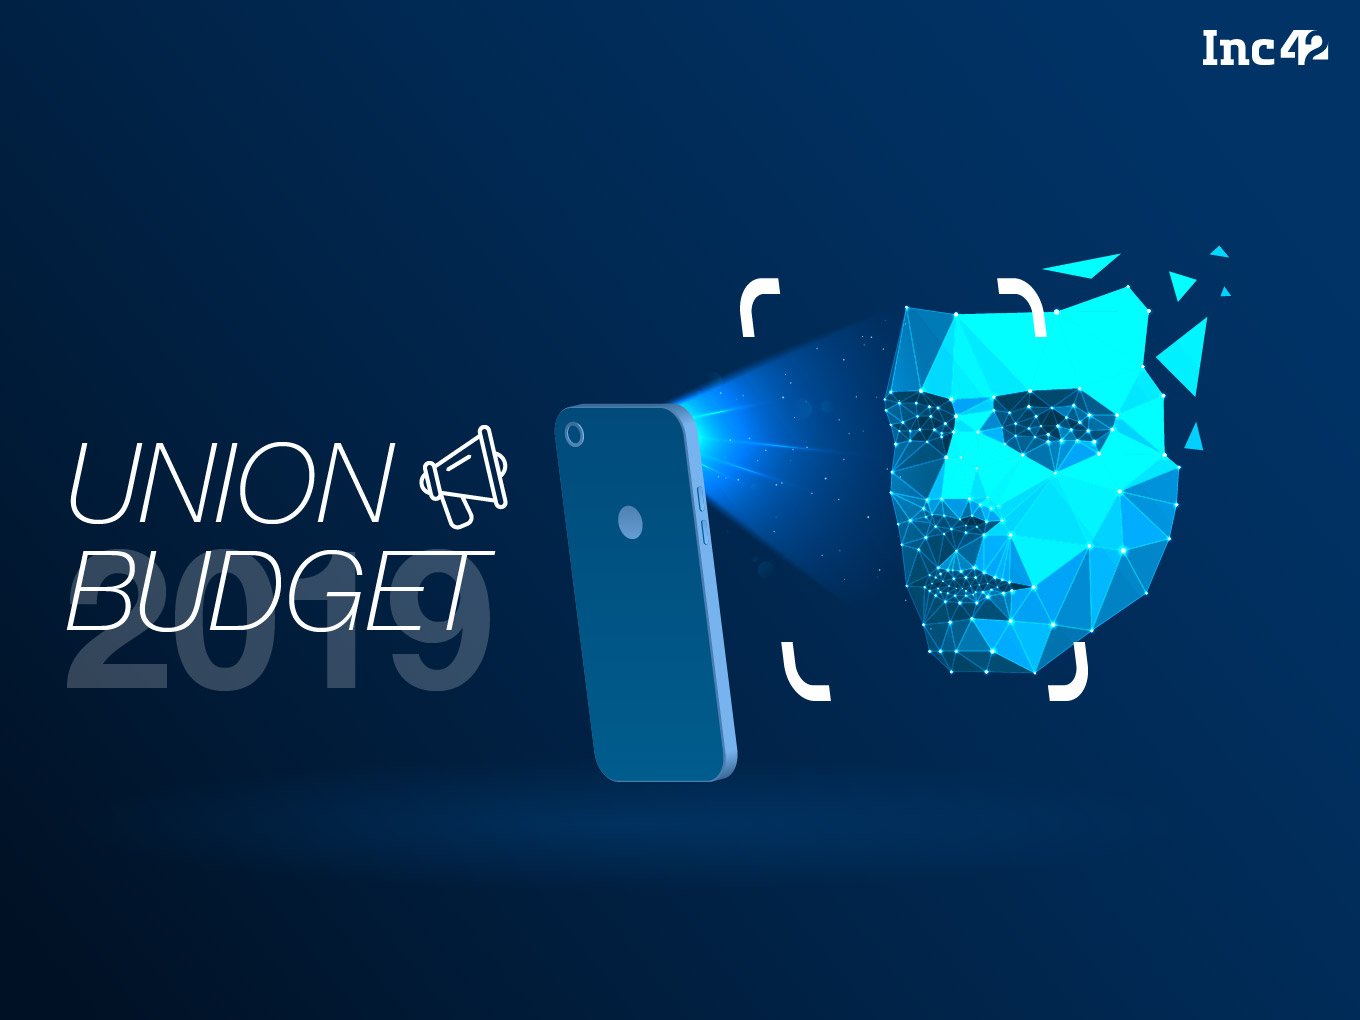 Union Budget 2019: Facial Recognition To Be Used To Assess Income Tax